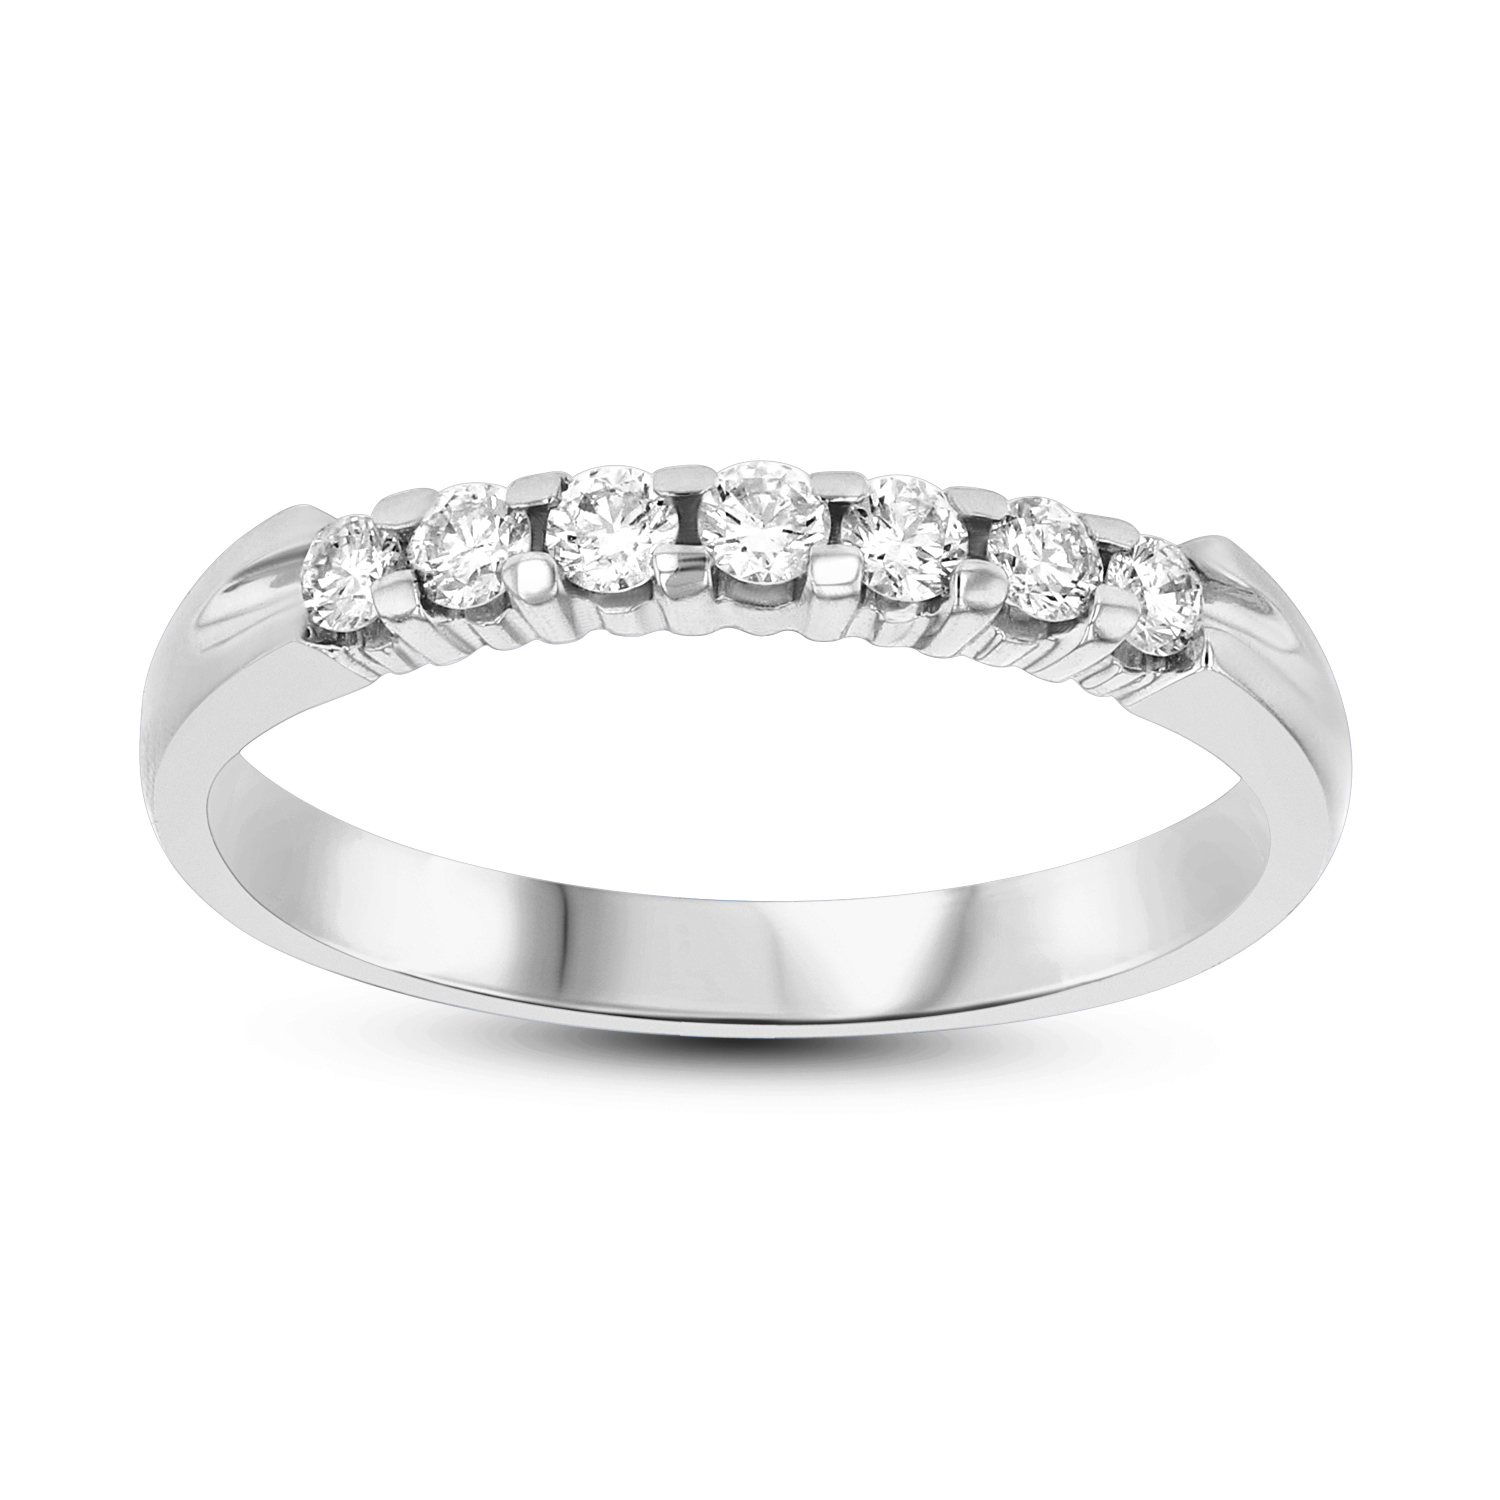 0.25ct tw 7 Stone Round Diamonds Shared Prong Anniversary or Wedding Band 14k Gold Bridal Ring H-J, SI